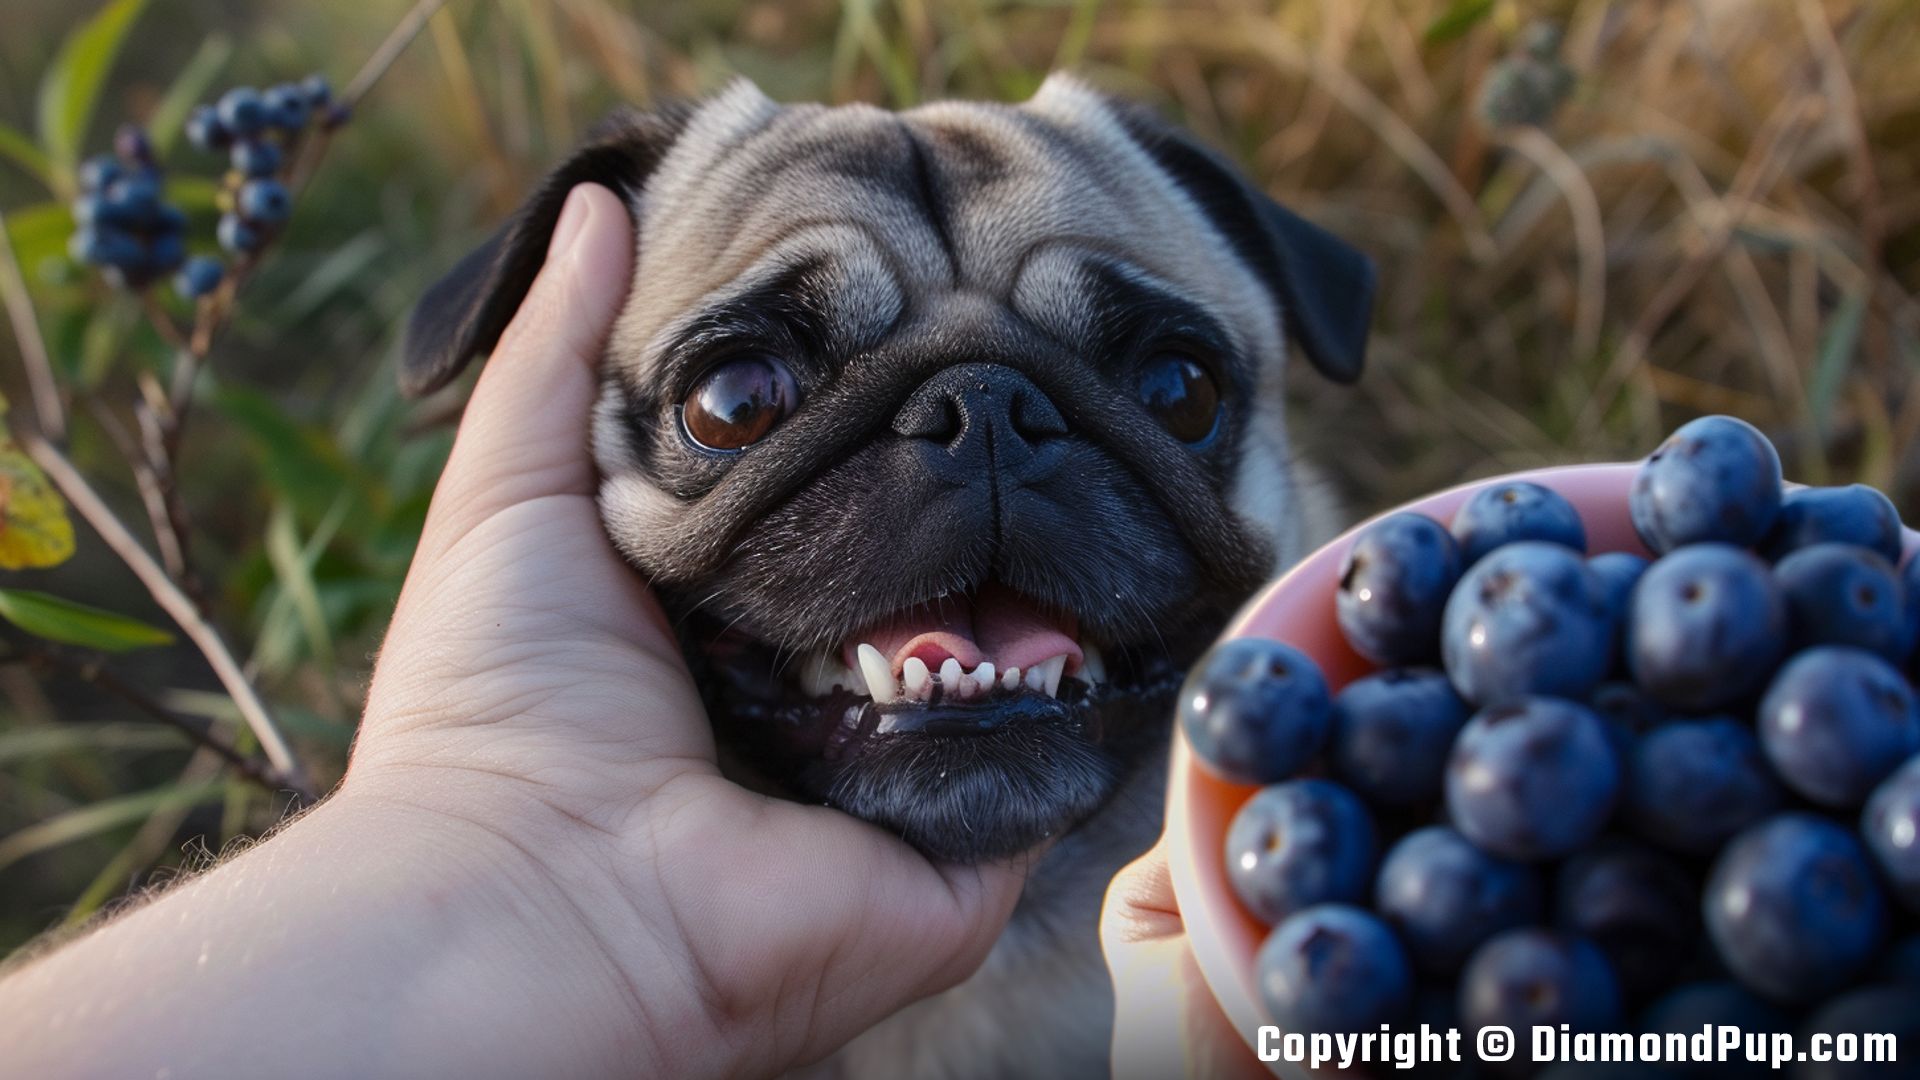 Image of a Happy Pug Eating Blueberries